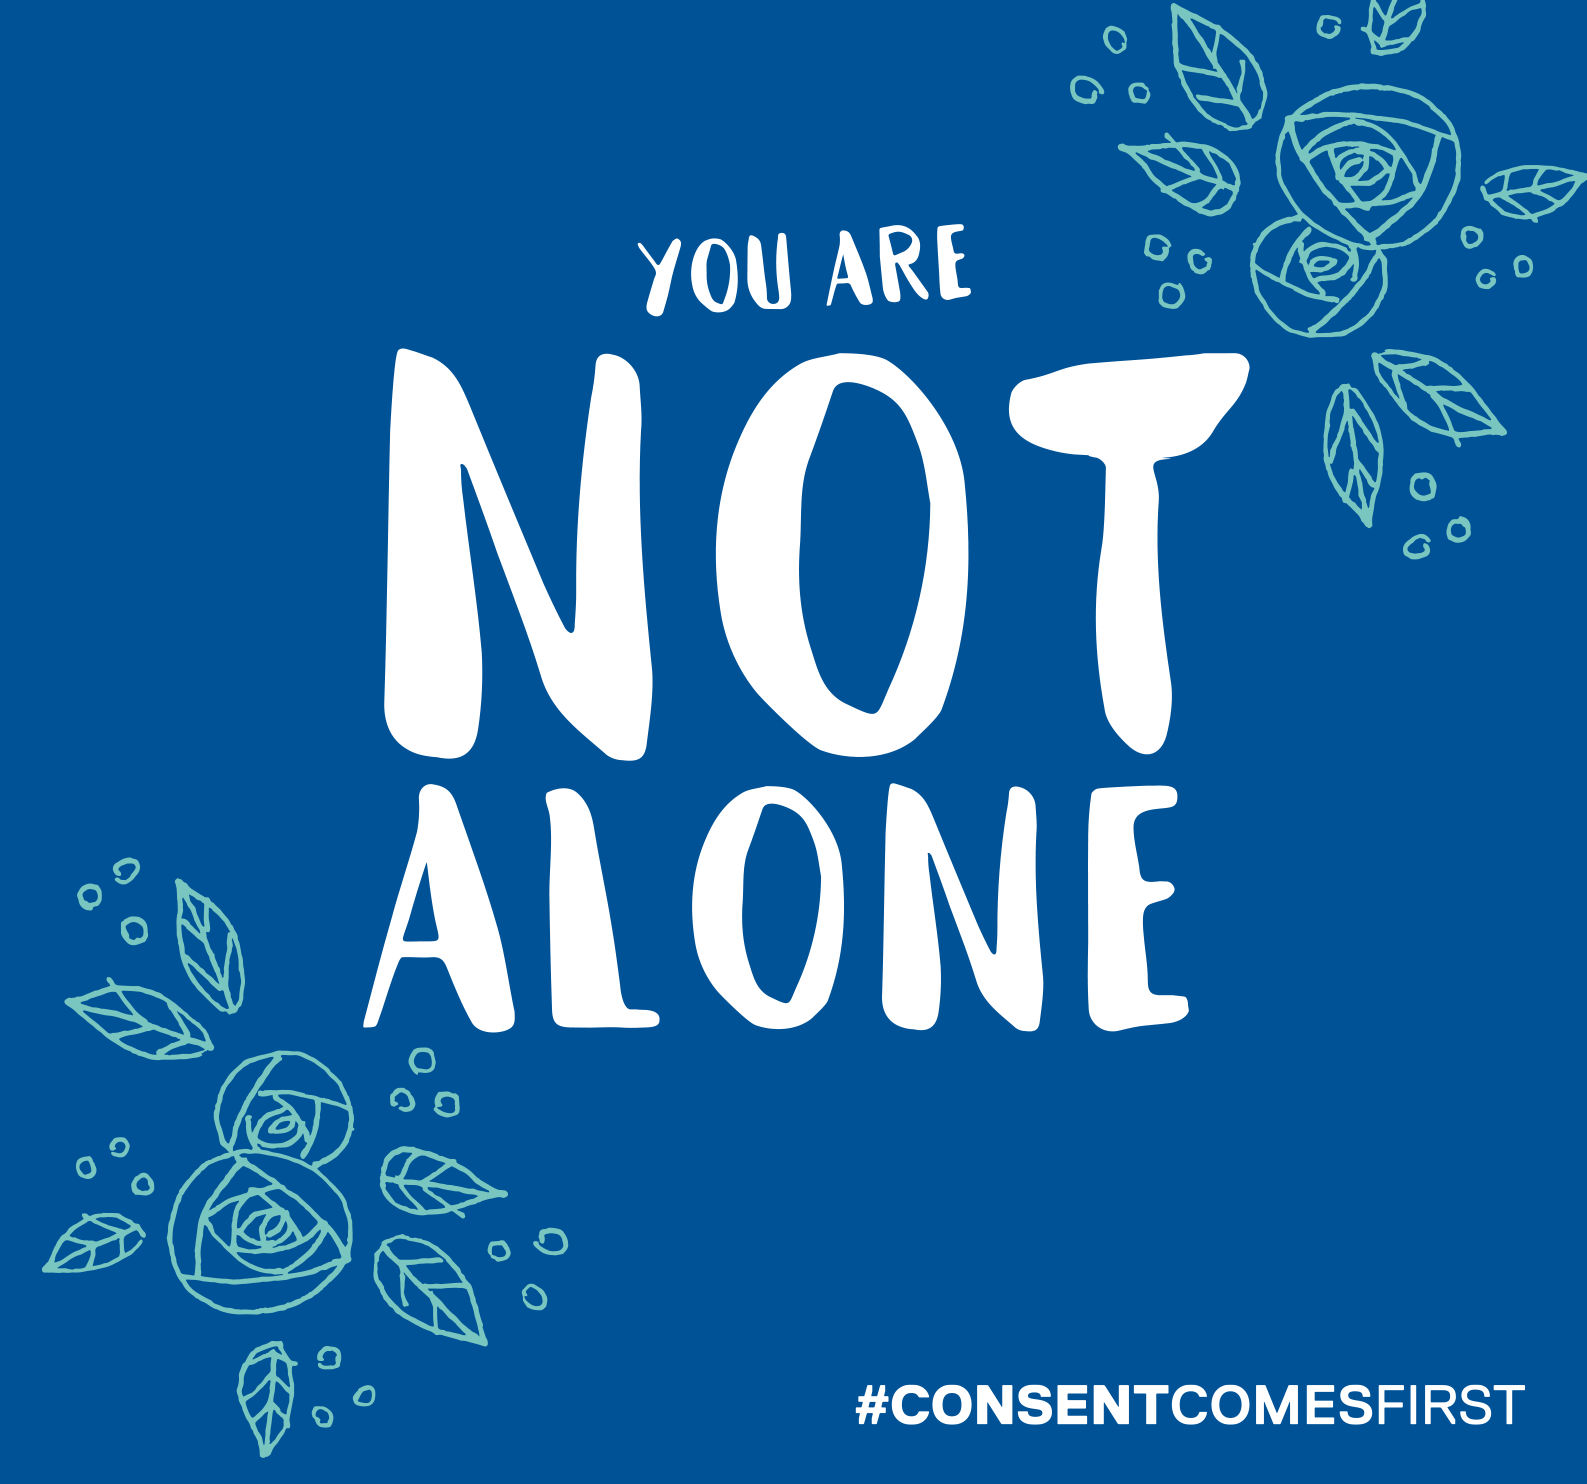 Office of Sexual Violence poster stating "You Are Not Alone"
